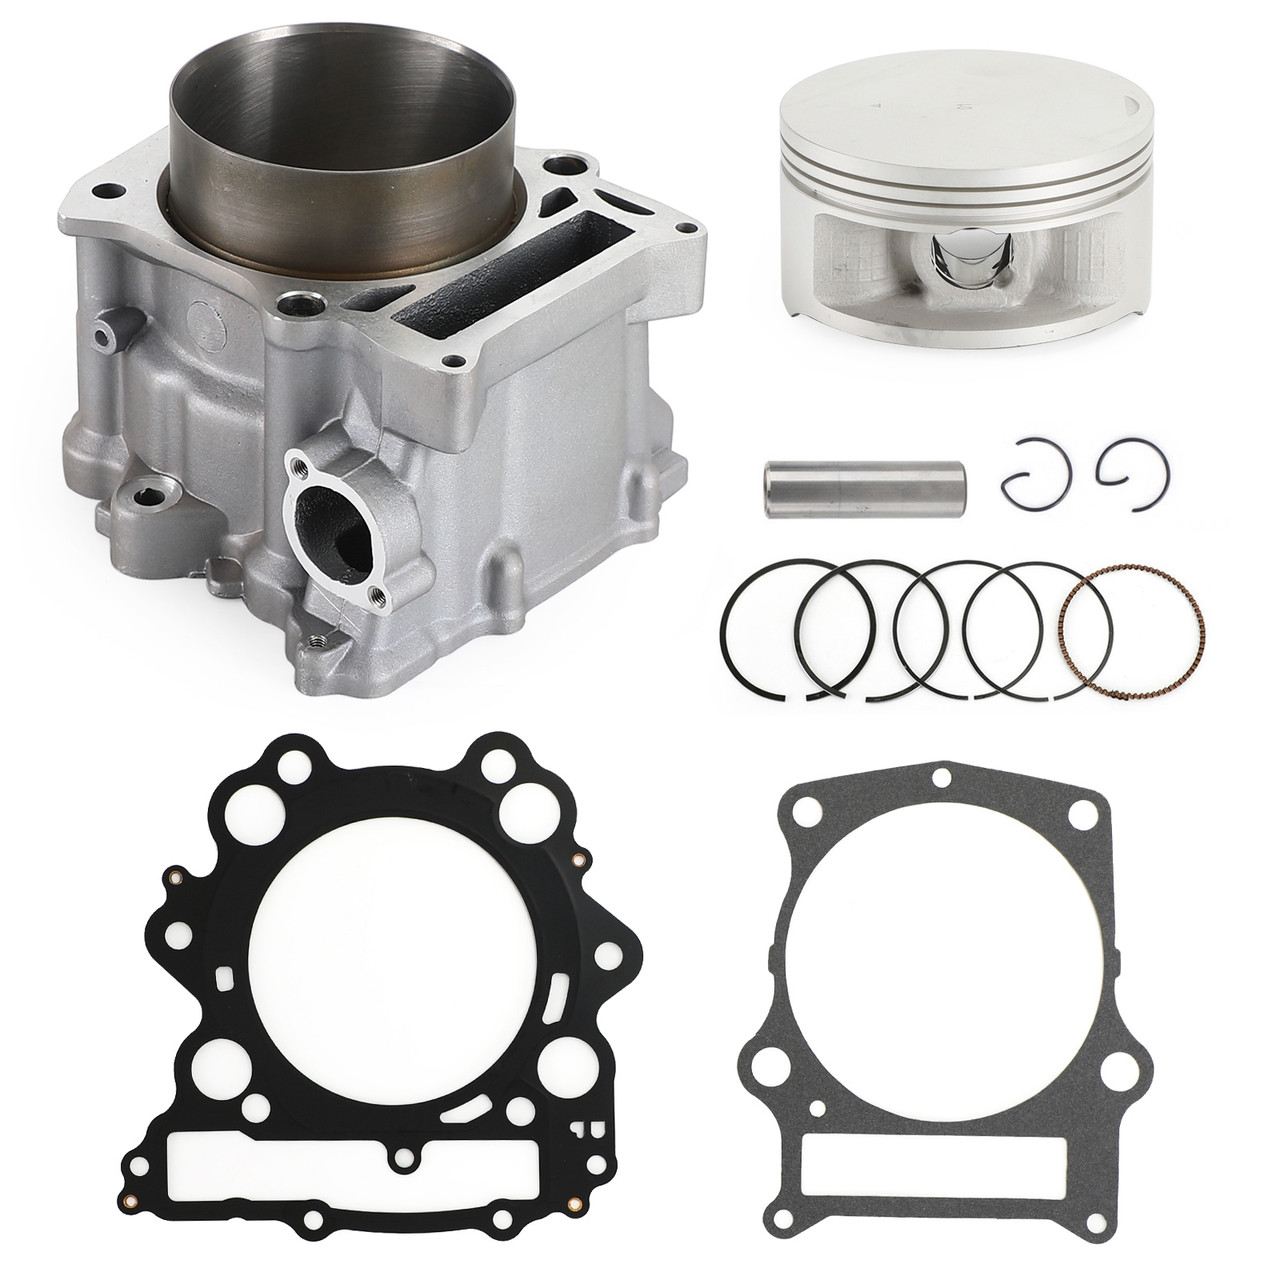 102mm Cylinder Jug Piston Top End Big Bore Kit Fit for Yamaha Raptor 660R 01-05 Grizzly 660 02-08 Rhino 660 04-07